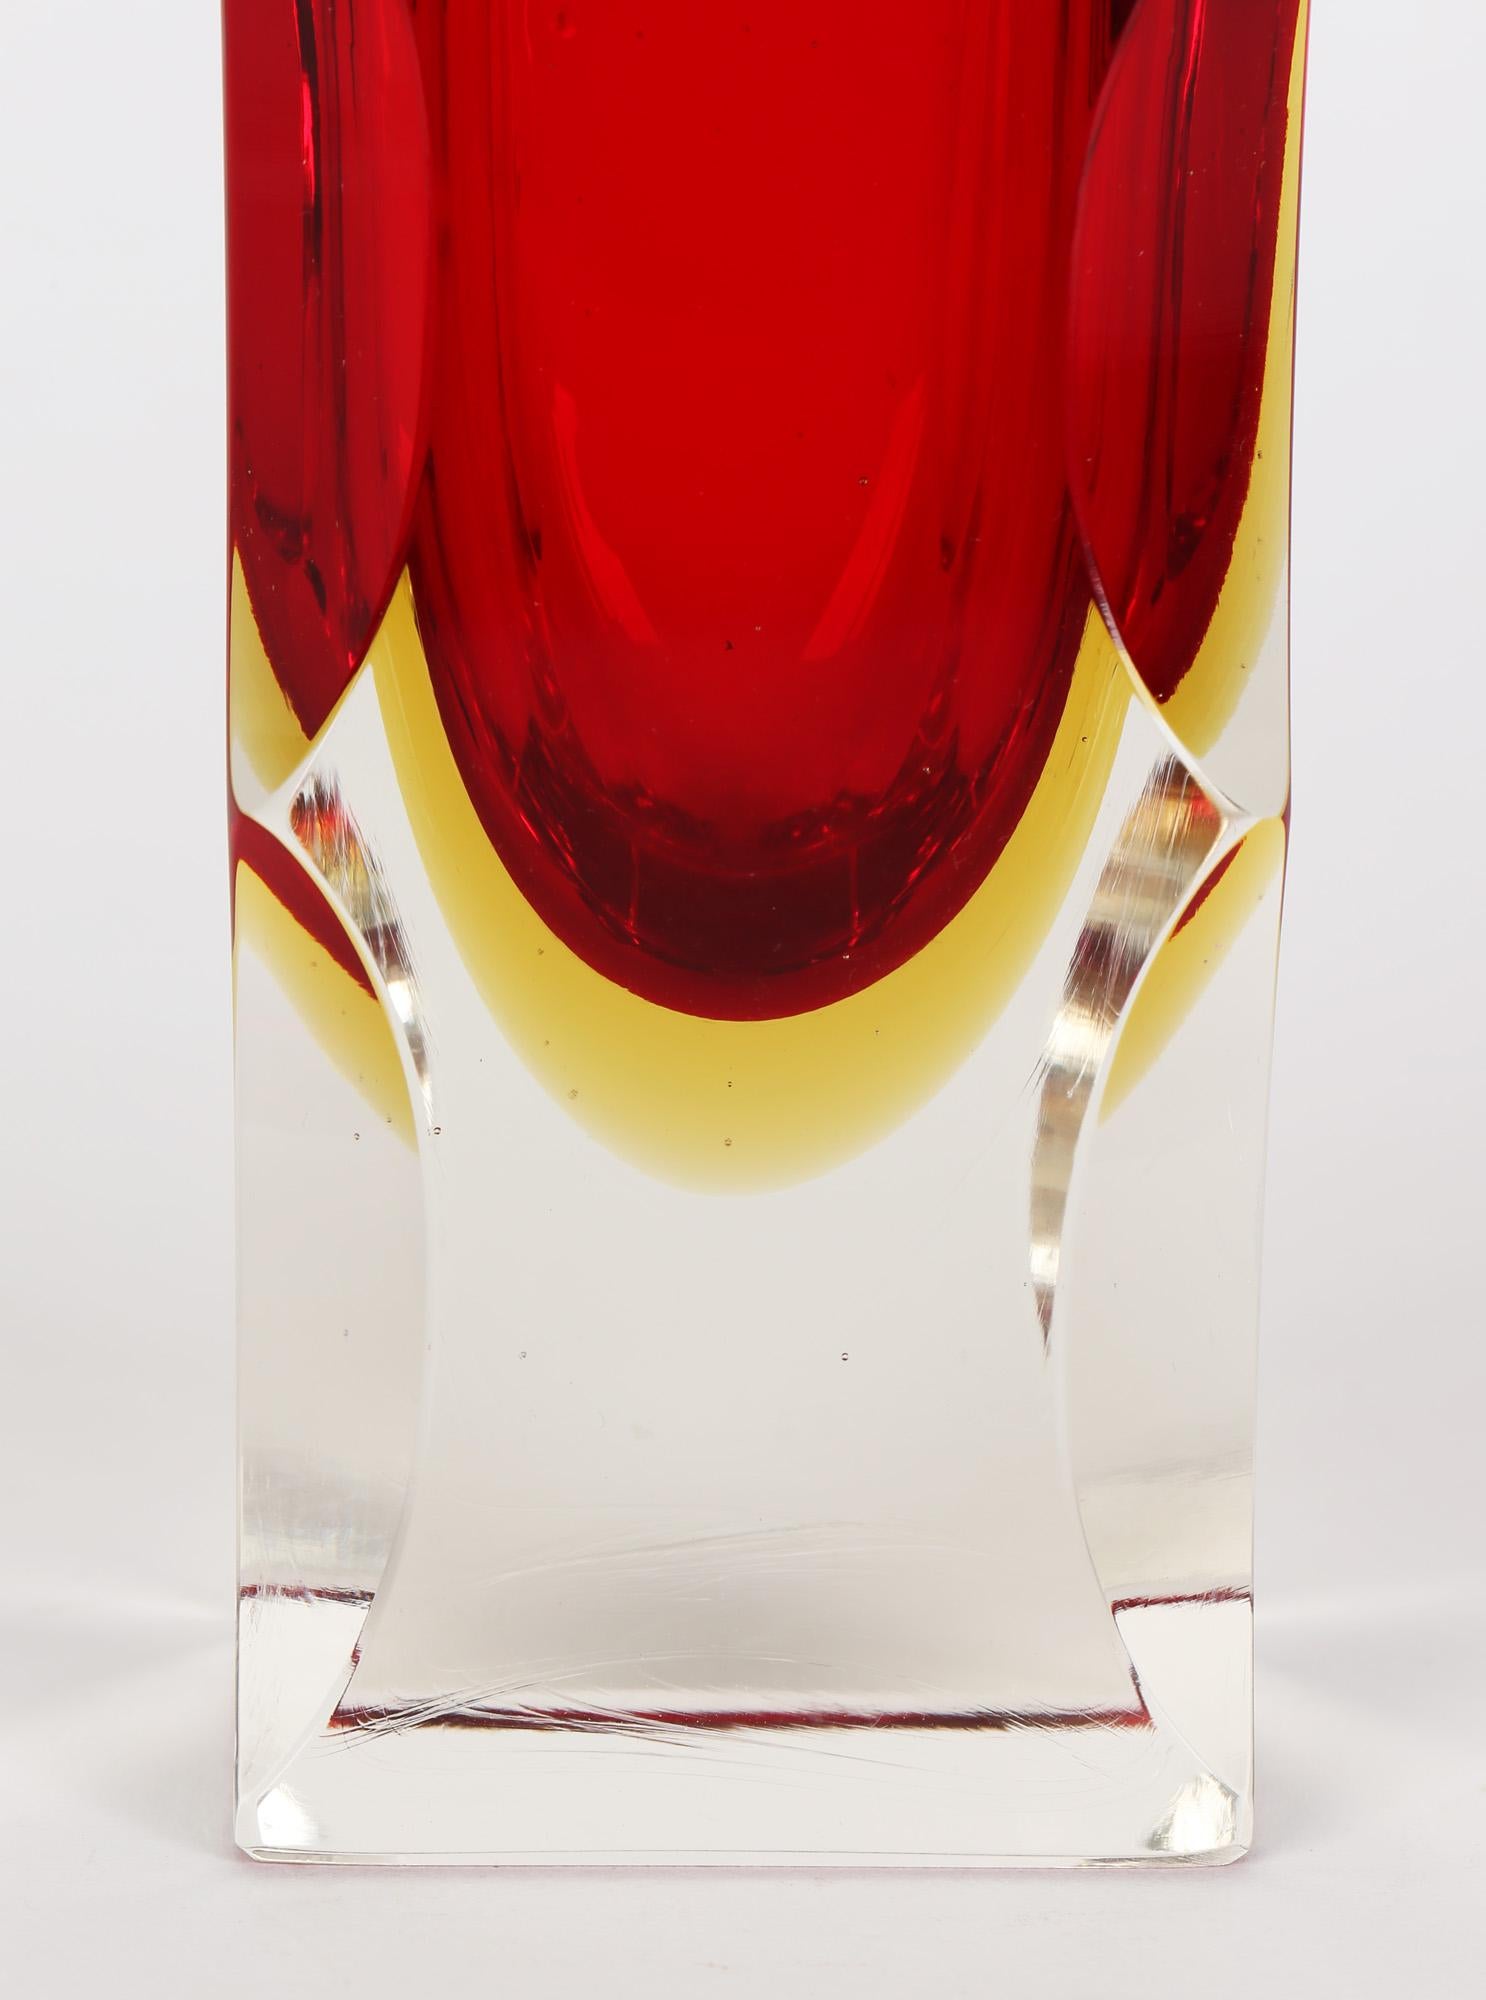 A large and unusual striking Italian Murano sommerso art glass vase with facet cut edges by Alessandro Mandruzzato dating from around 1960/70. This exceptional and heavily made square shaped clear glass vase has a bright red centre with a yellow